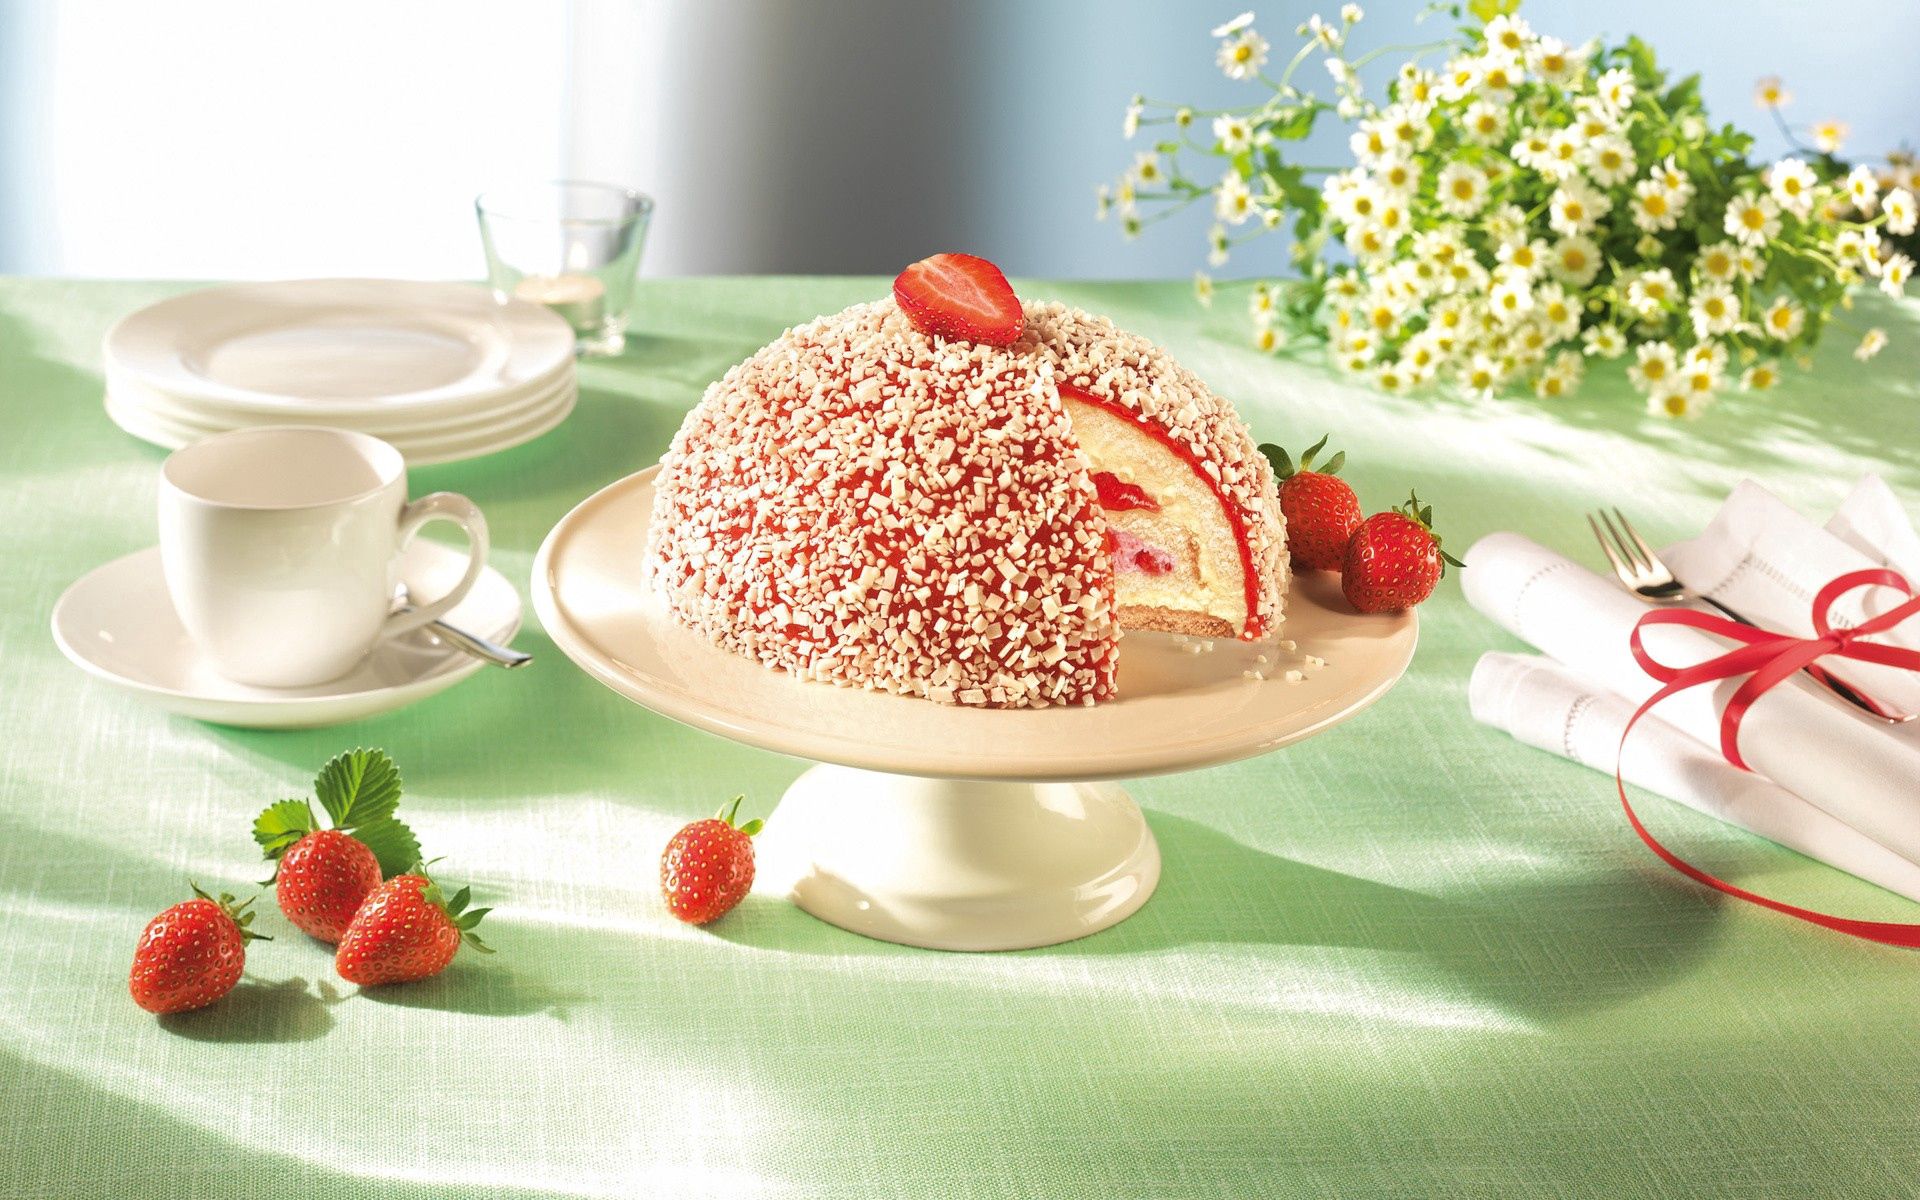 97772 download wallpaper food, strawberry, tablewares, cake screensavers and pictures for free